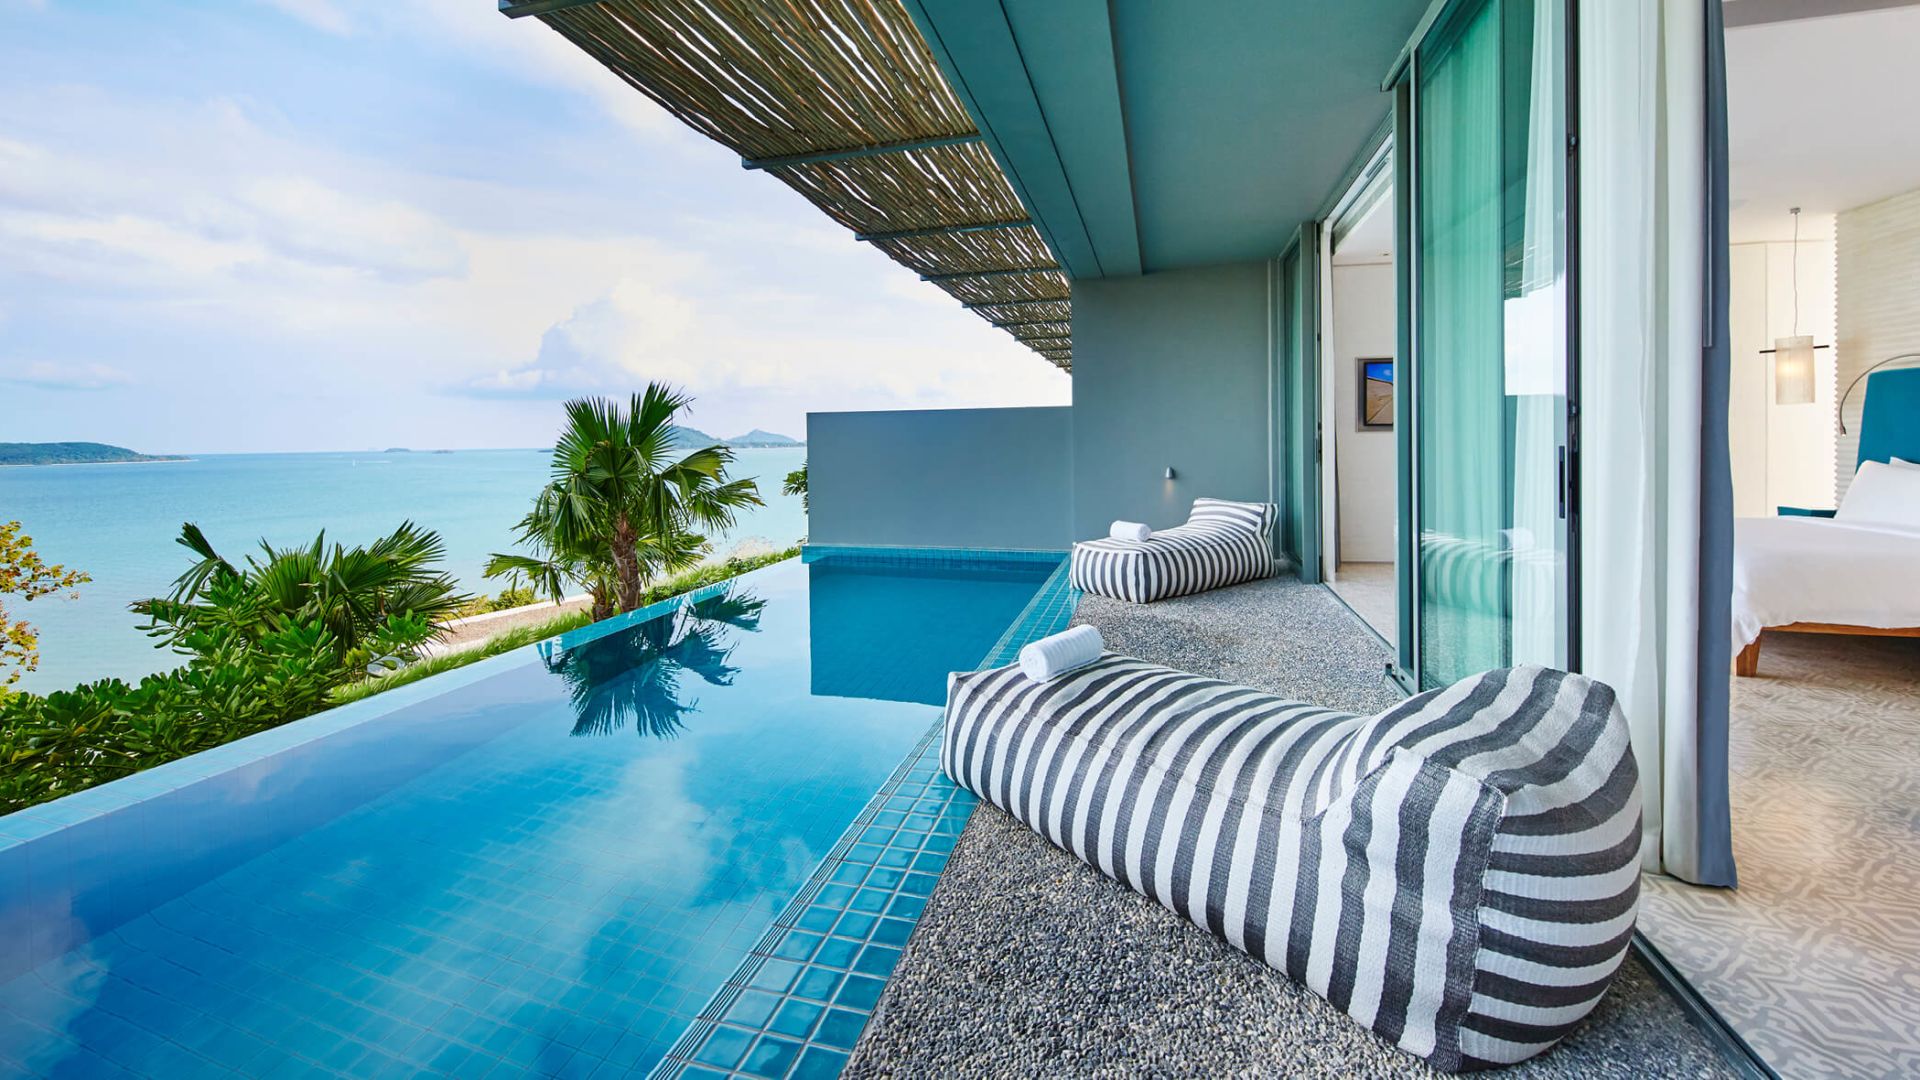 Infinity pool with sun loungers - Image